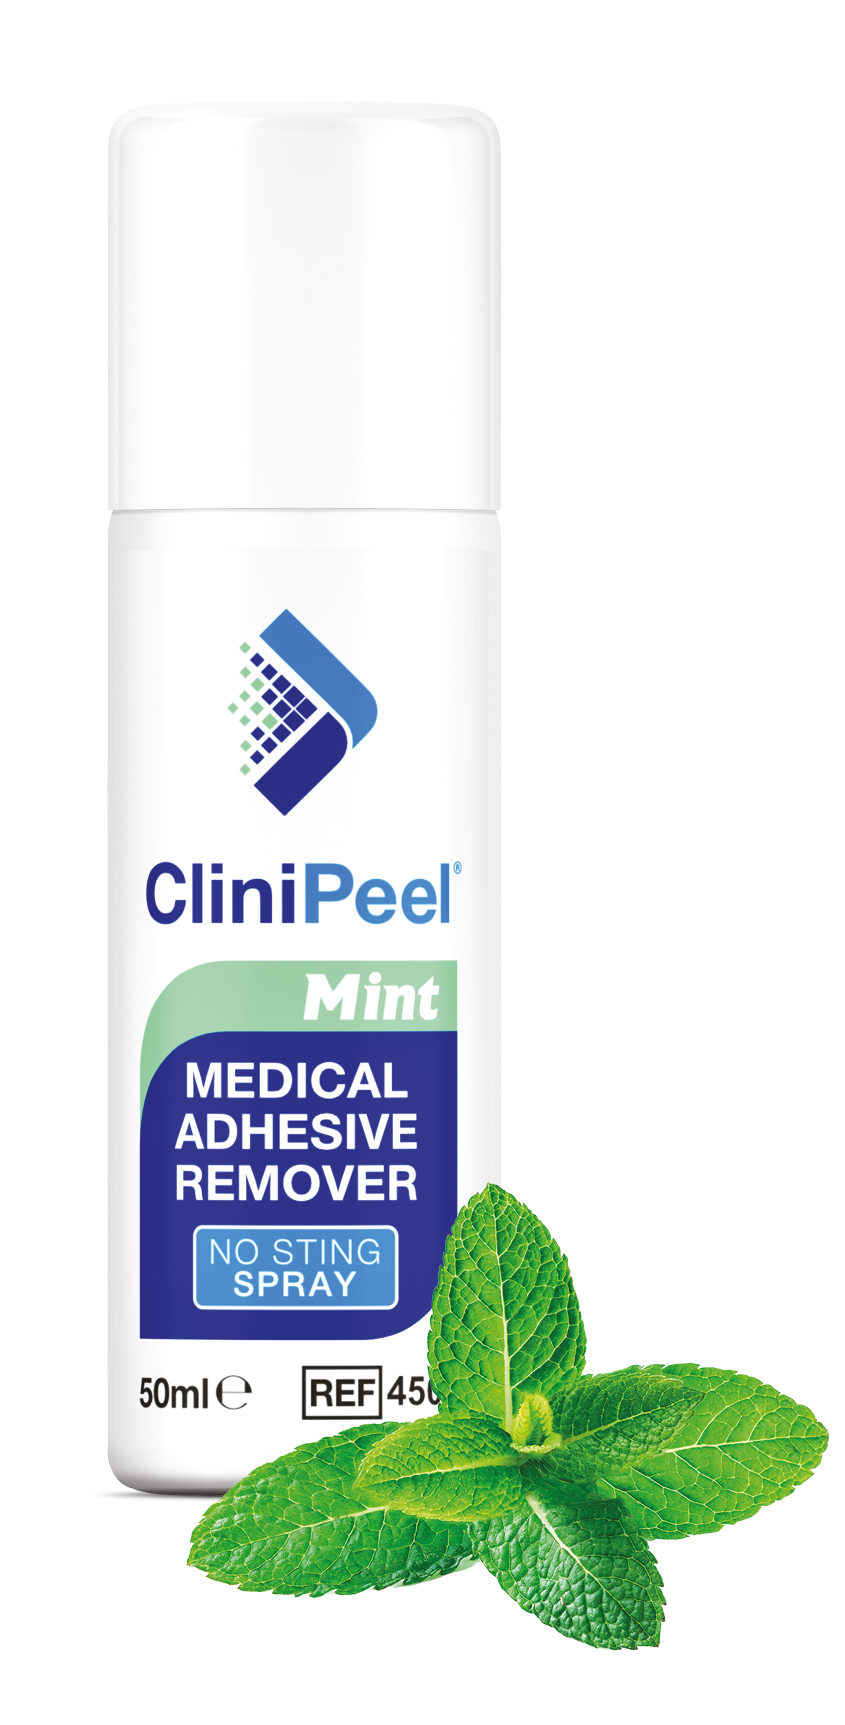 Appeel Medical Adhesive Remover, CliniMed Stoma Skin Care